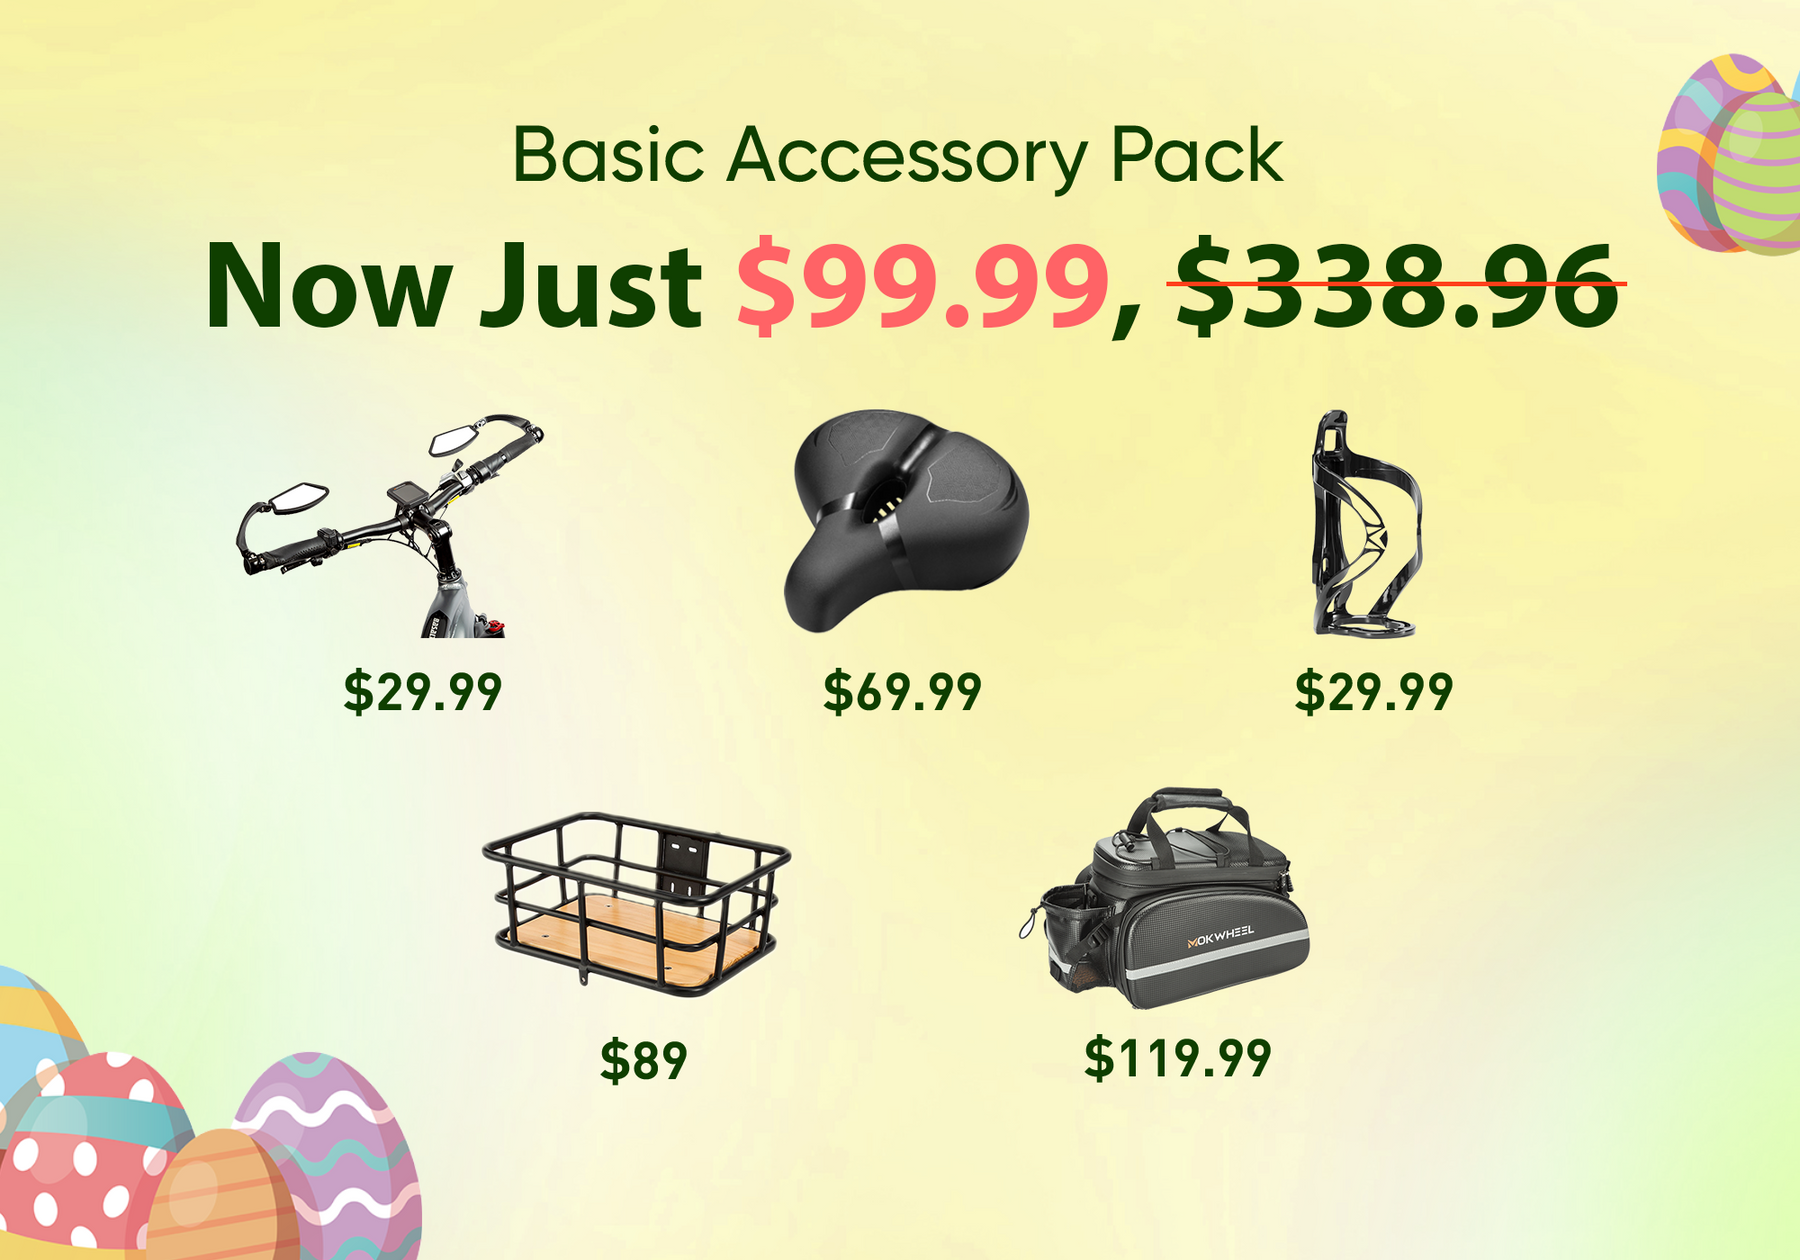 Basic Accessory Pack